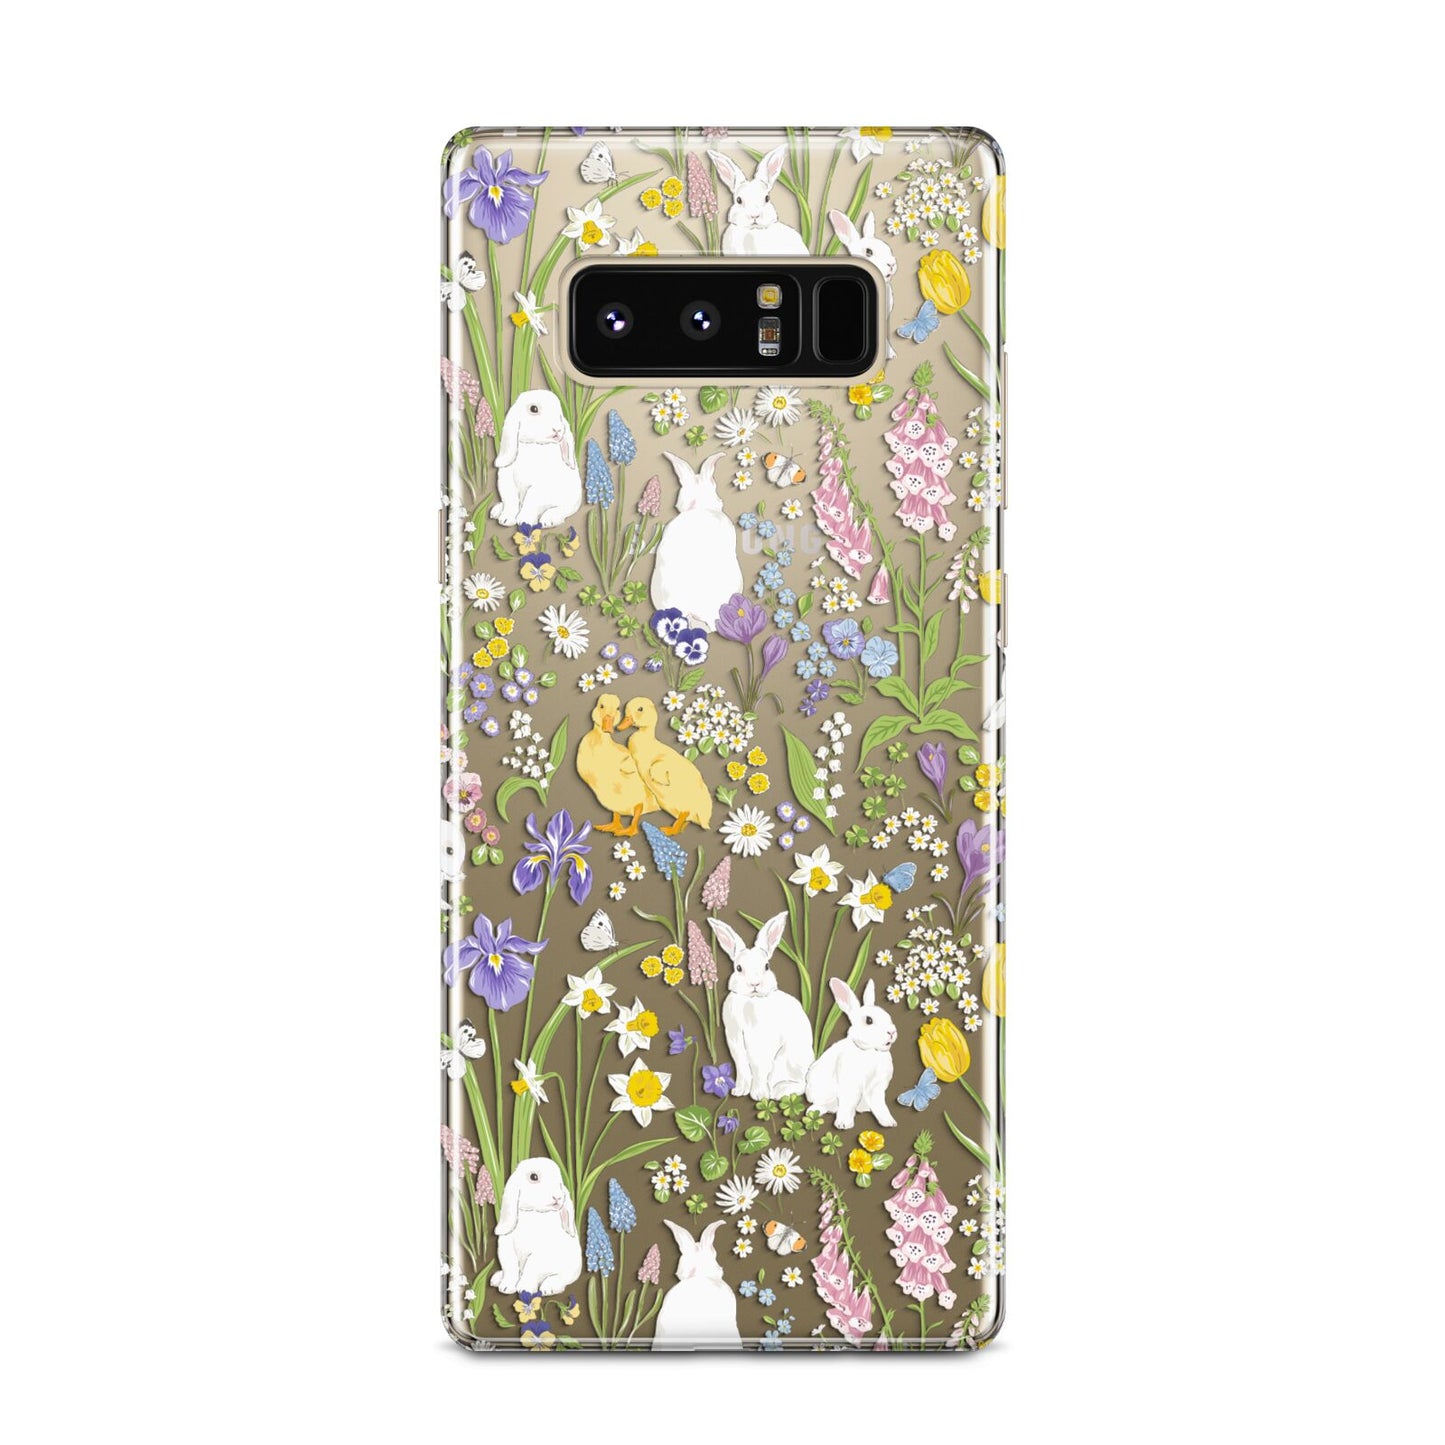 Easter Samsung Galaxy Note 8 Case